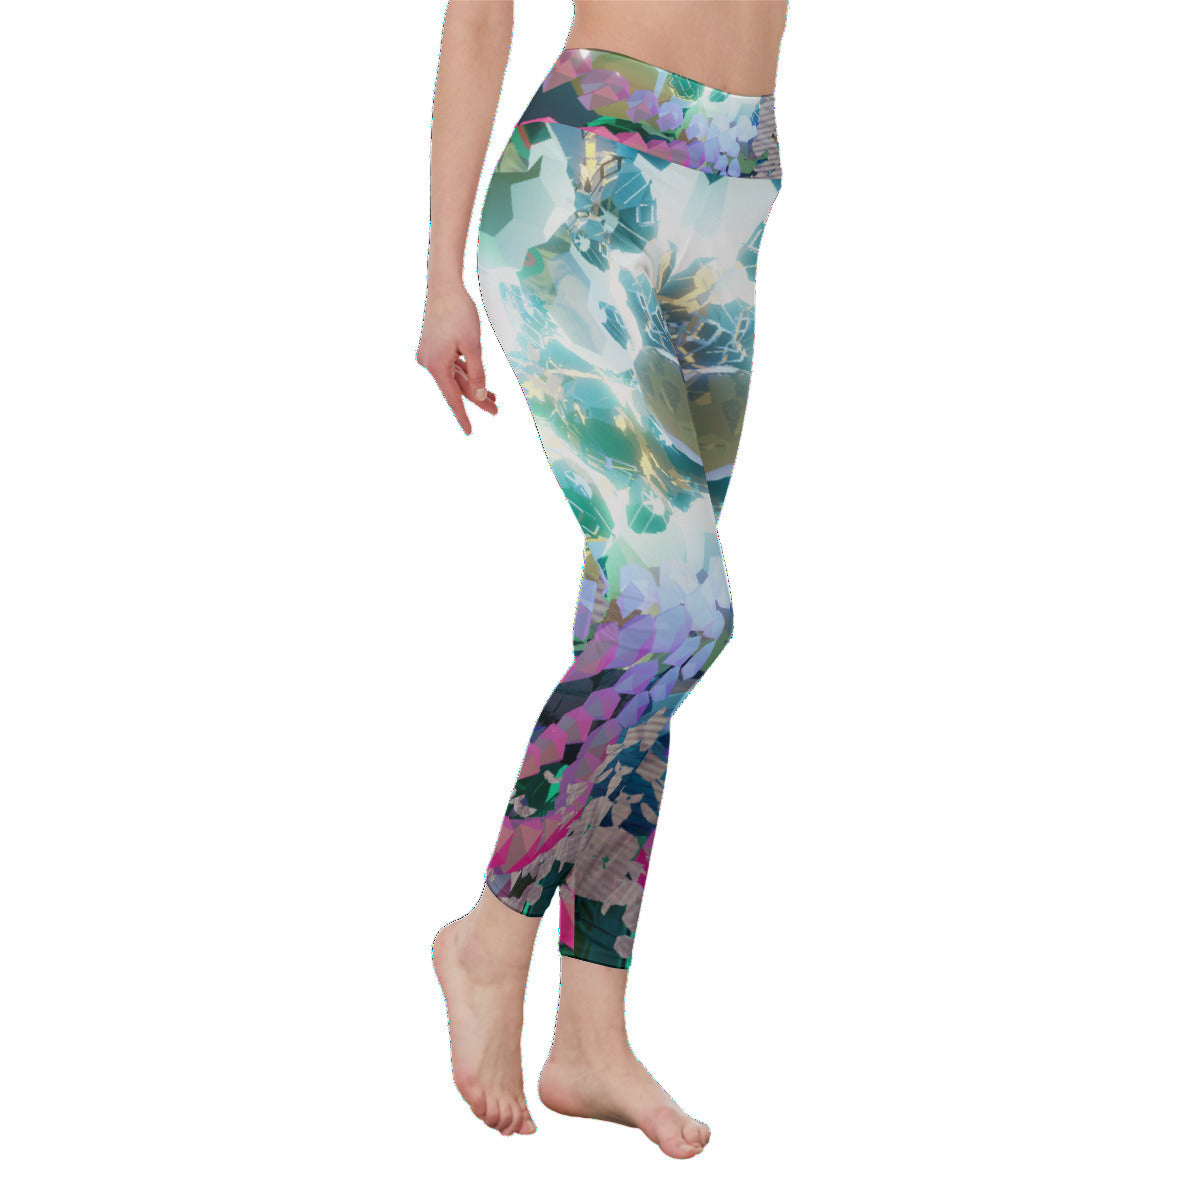 3D Psychedelic Floral Print Women's High Waist Leggings | Side Stitch Closure